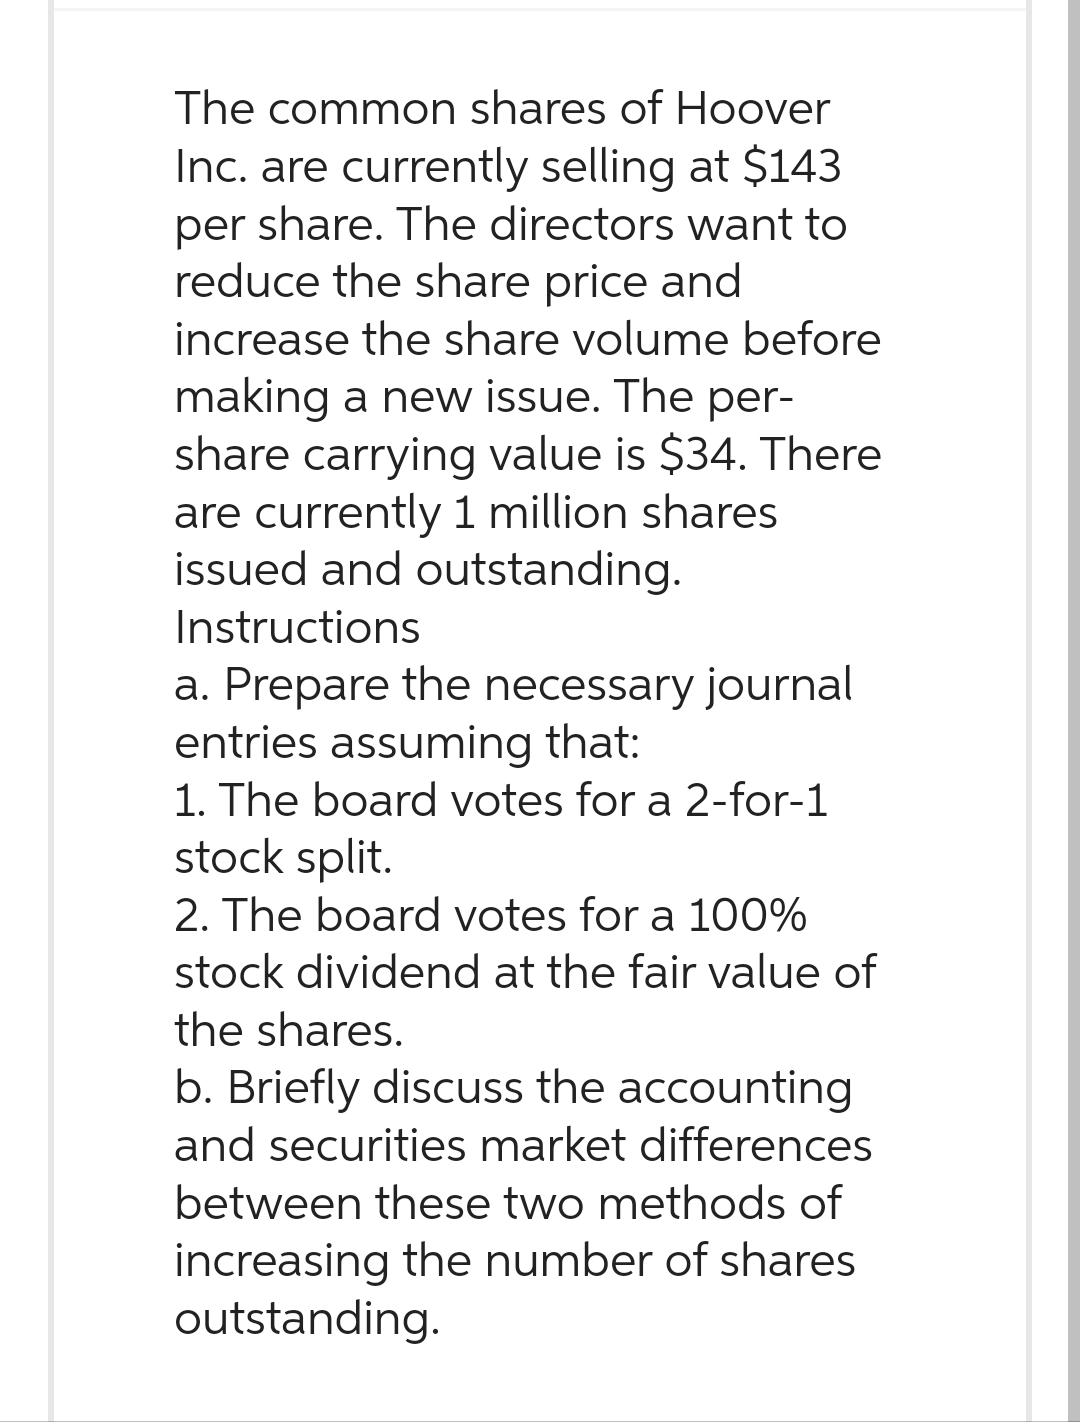 The common shares of Hoover
Inc. are currently selling at $143
per share. The directors want to
reduce the share price and
increase the share volume before
making a new issue. The per-
share carrying value is $34. There
are currently 1 million shares
issued and outstanding.
Instructions
a. Prepare the necessary journal
entries assuming that:
1. The board votes for a 2-for-1
stock split.
2. The board votes for a 100%
stock dividend at the fair value of
the shares.
b. Briefly discuss the accounting
and securities market differences
between these two methods of
increasing the number of shares
outstanding.